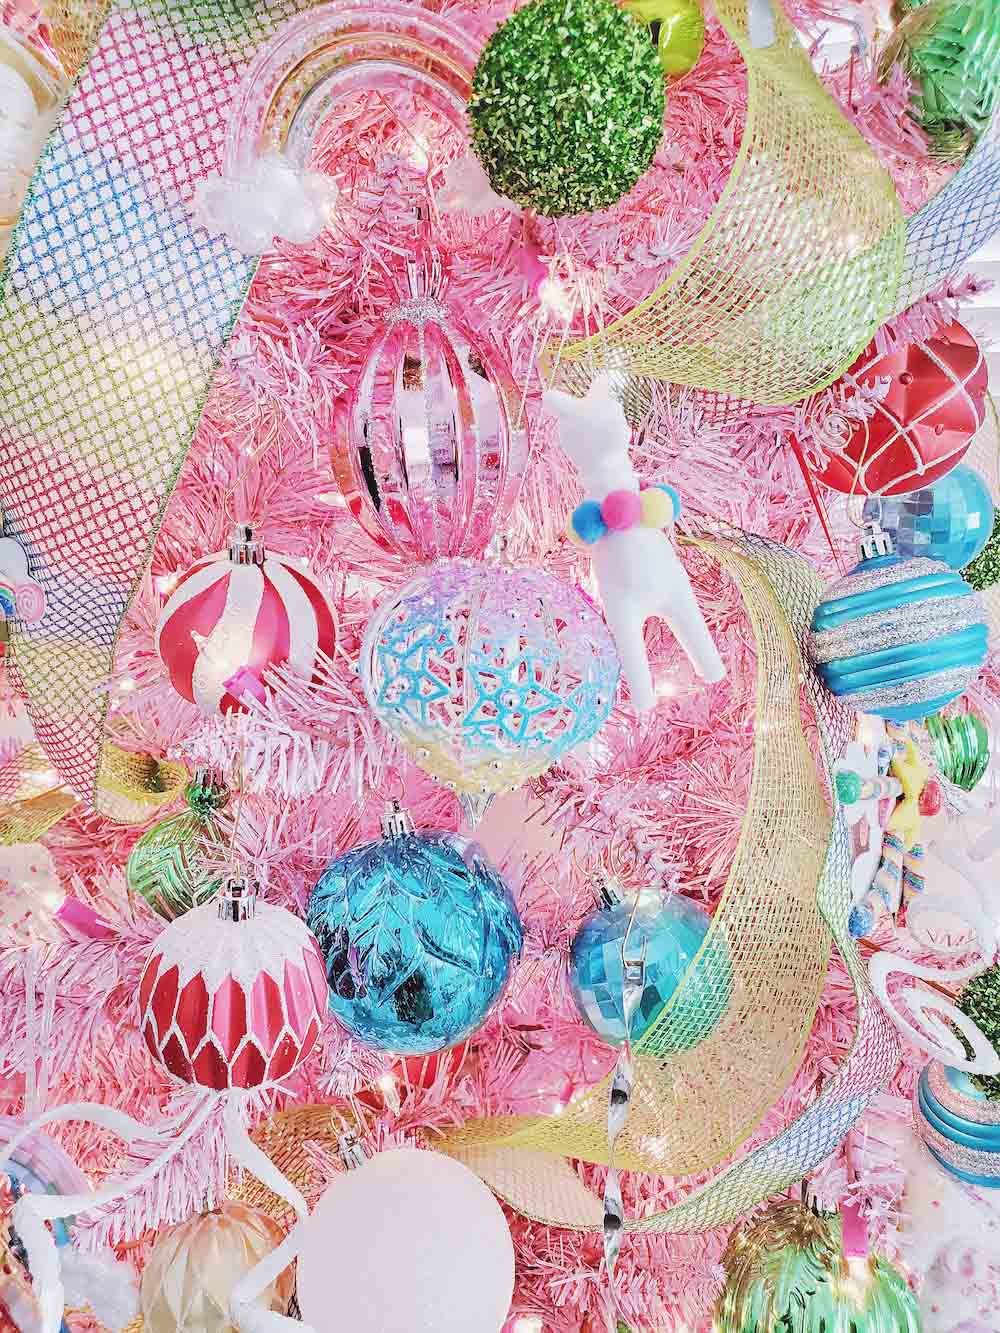 Close up shot of colorful ornaments on a pink tree